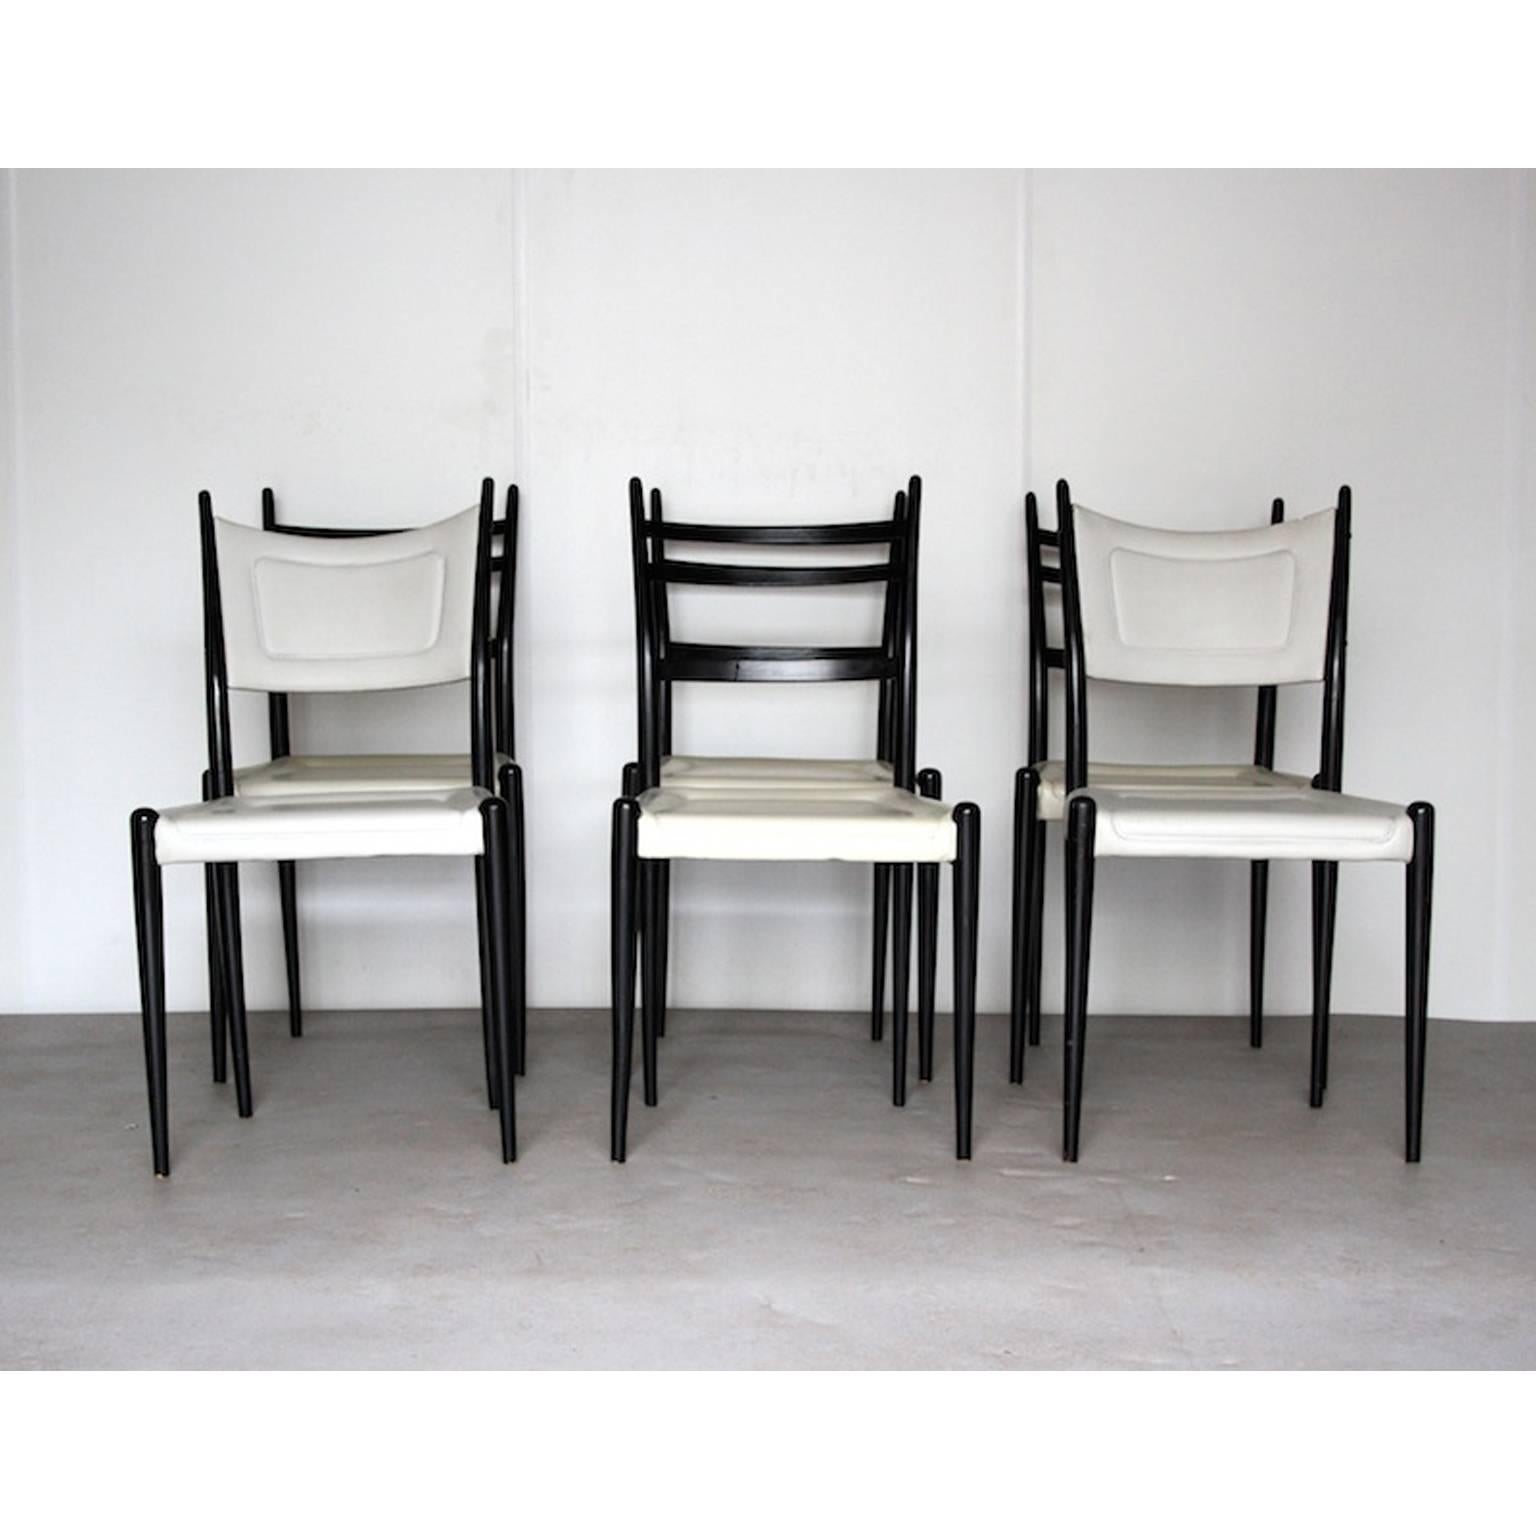 Fantastic elegant dining chairs that look Italian made, but are actually British! These chairs are made of black painted wood with a white faux leather seating. Two of the chairs have their back upholstered in the same faux leather. They were made